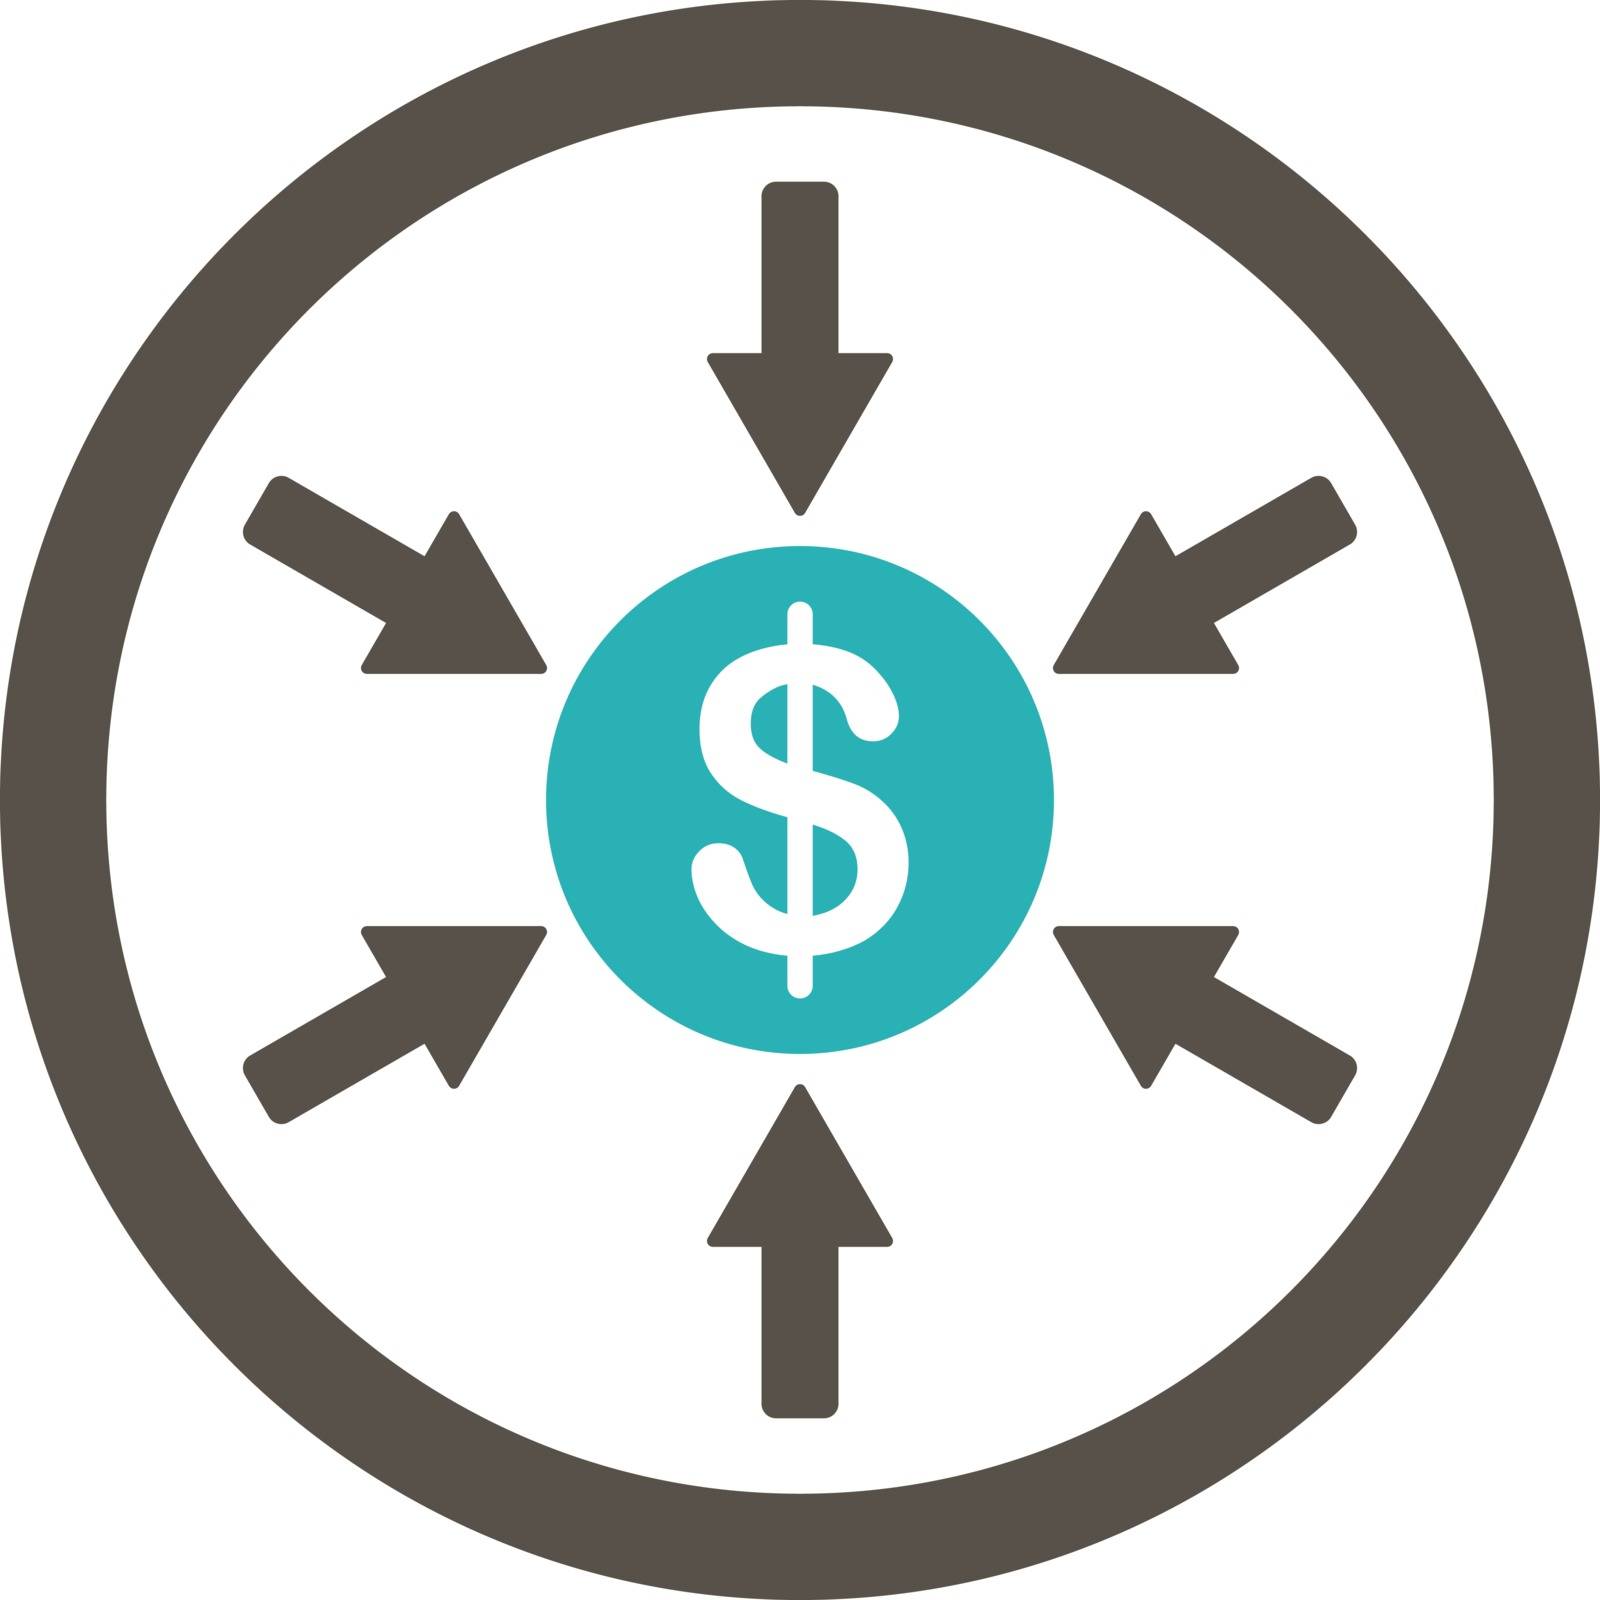 Income vector icon. This flat rounded symbol uses grey and cyan colors and isolated on a white background.